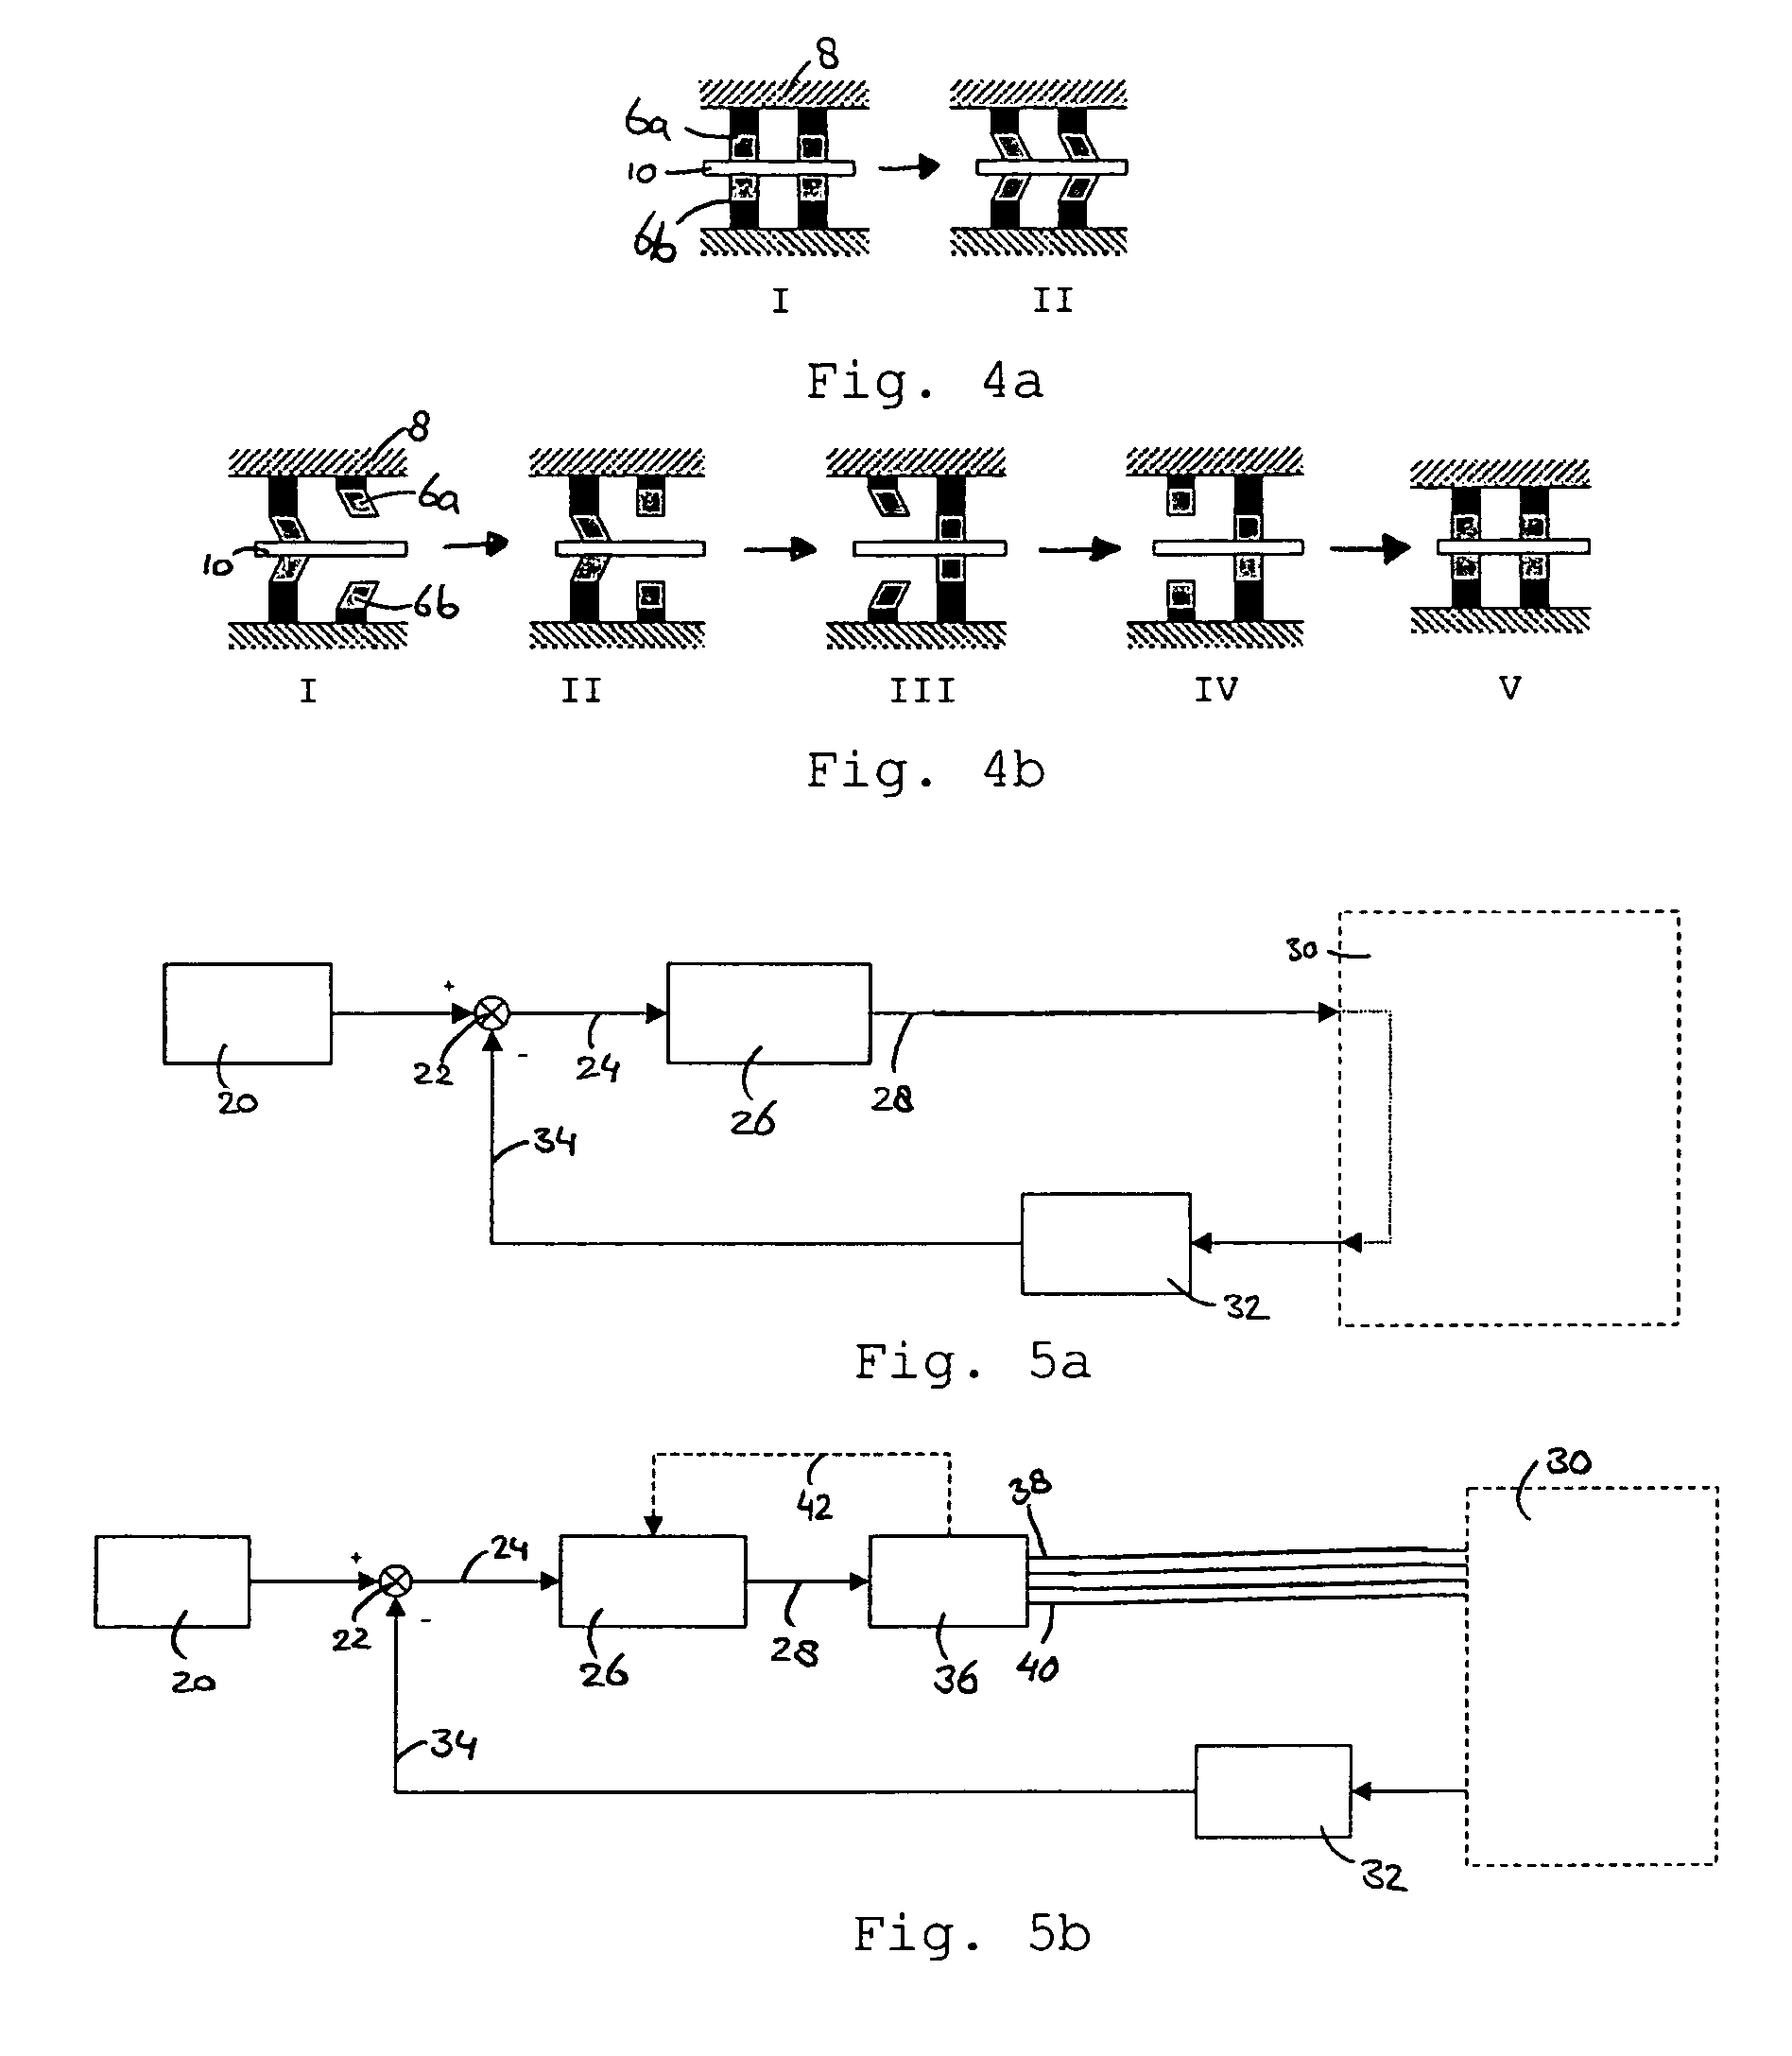 System and method for moving an object employing piezo actuators